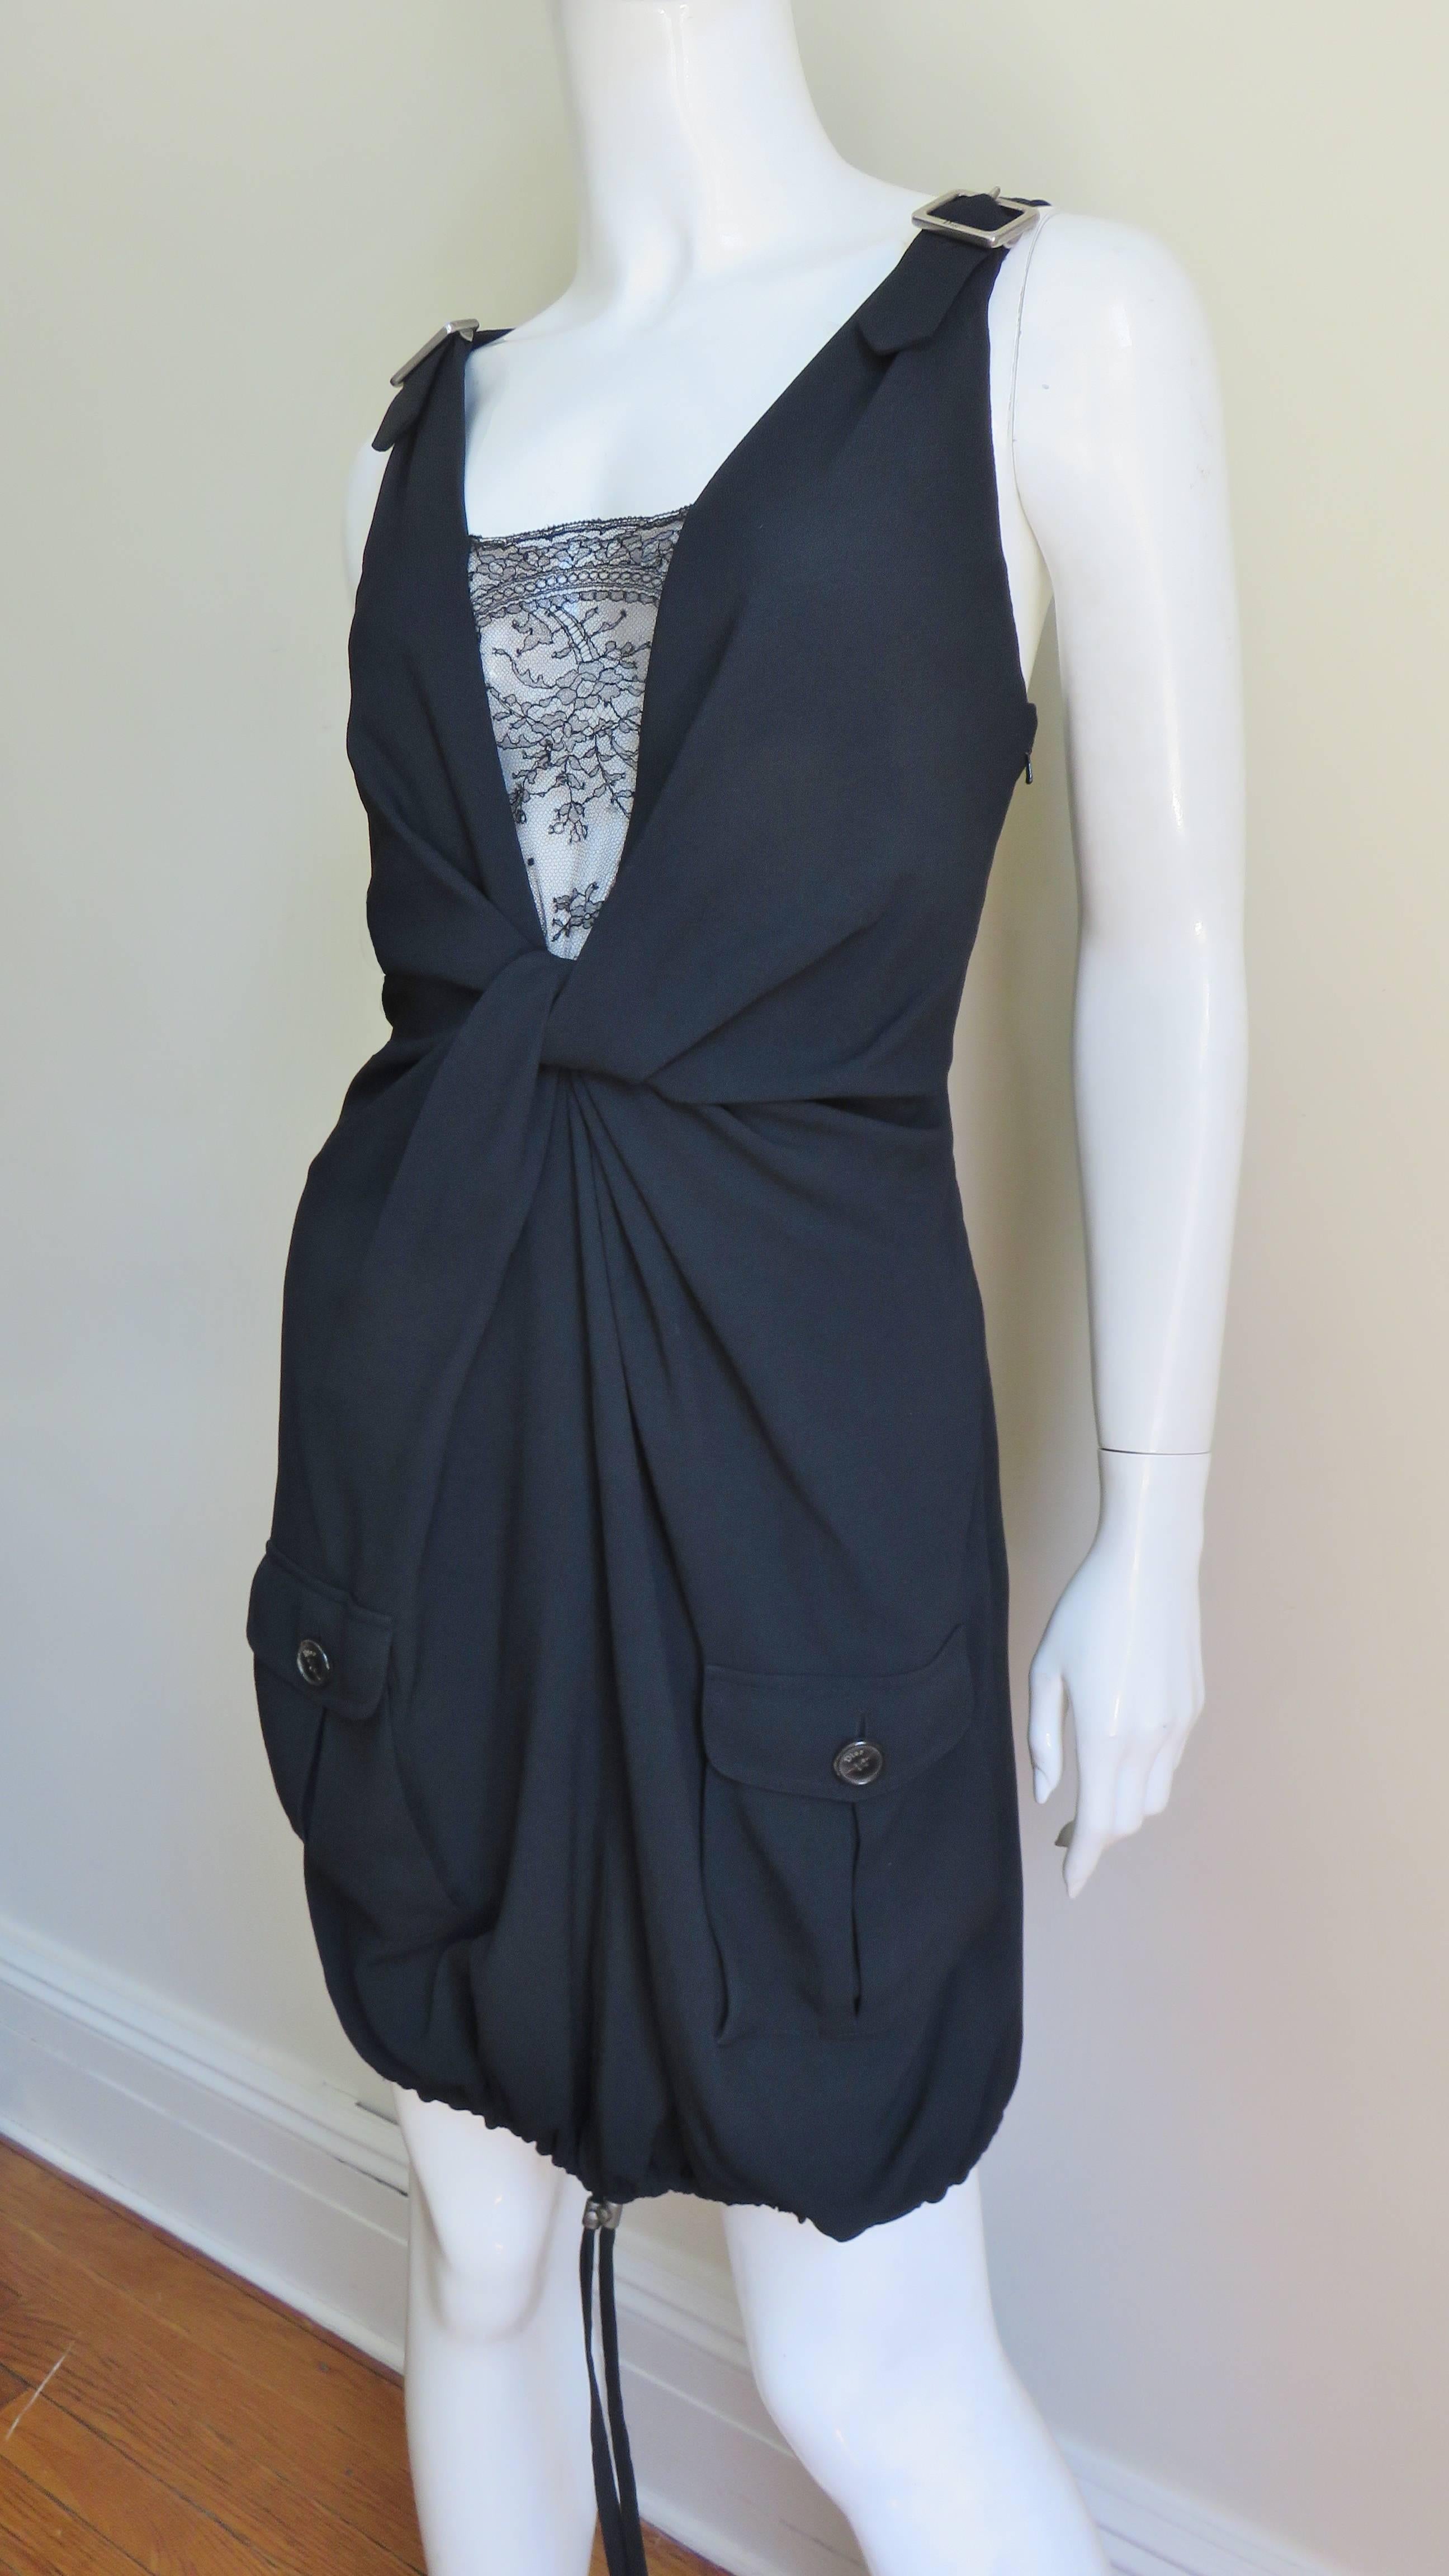 A fabulous black silk dress from John Galliano for Christian Dior.  It has adjustable straps with silver Dior inscribed buckles at the shoulders and back of each strap plus a center front sheer black lace panel at the plunging neck. There is front